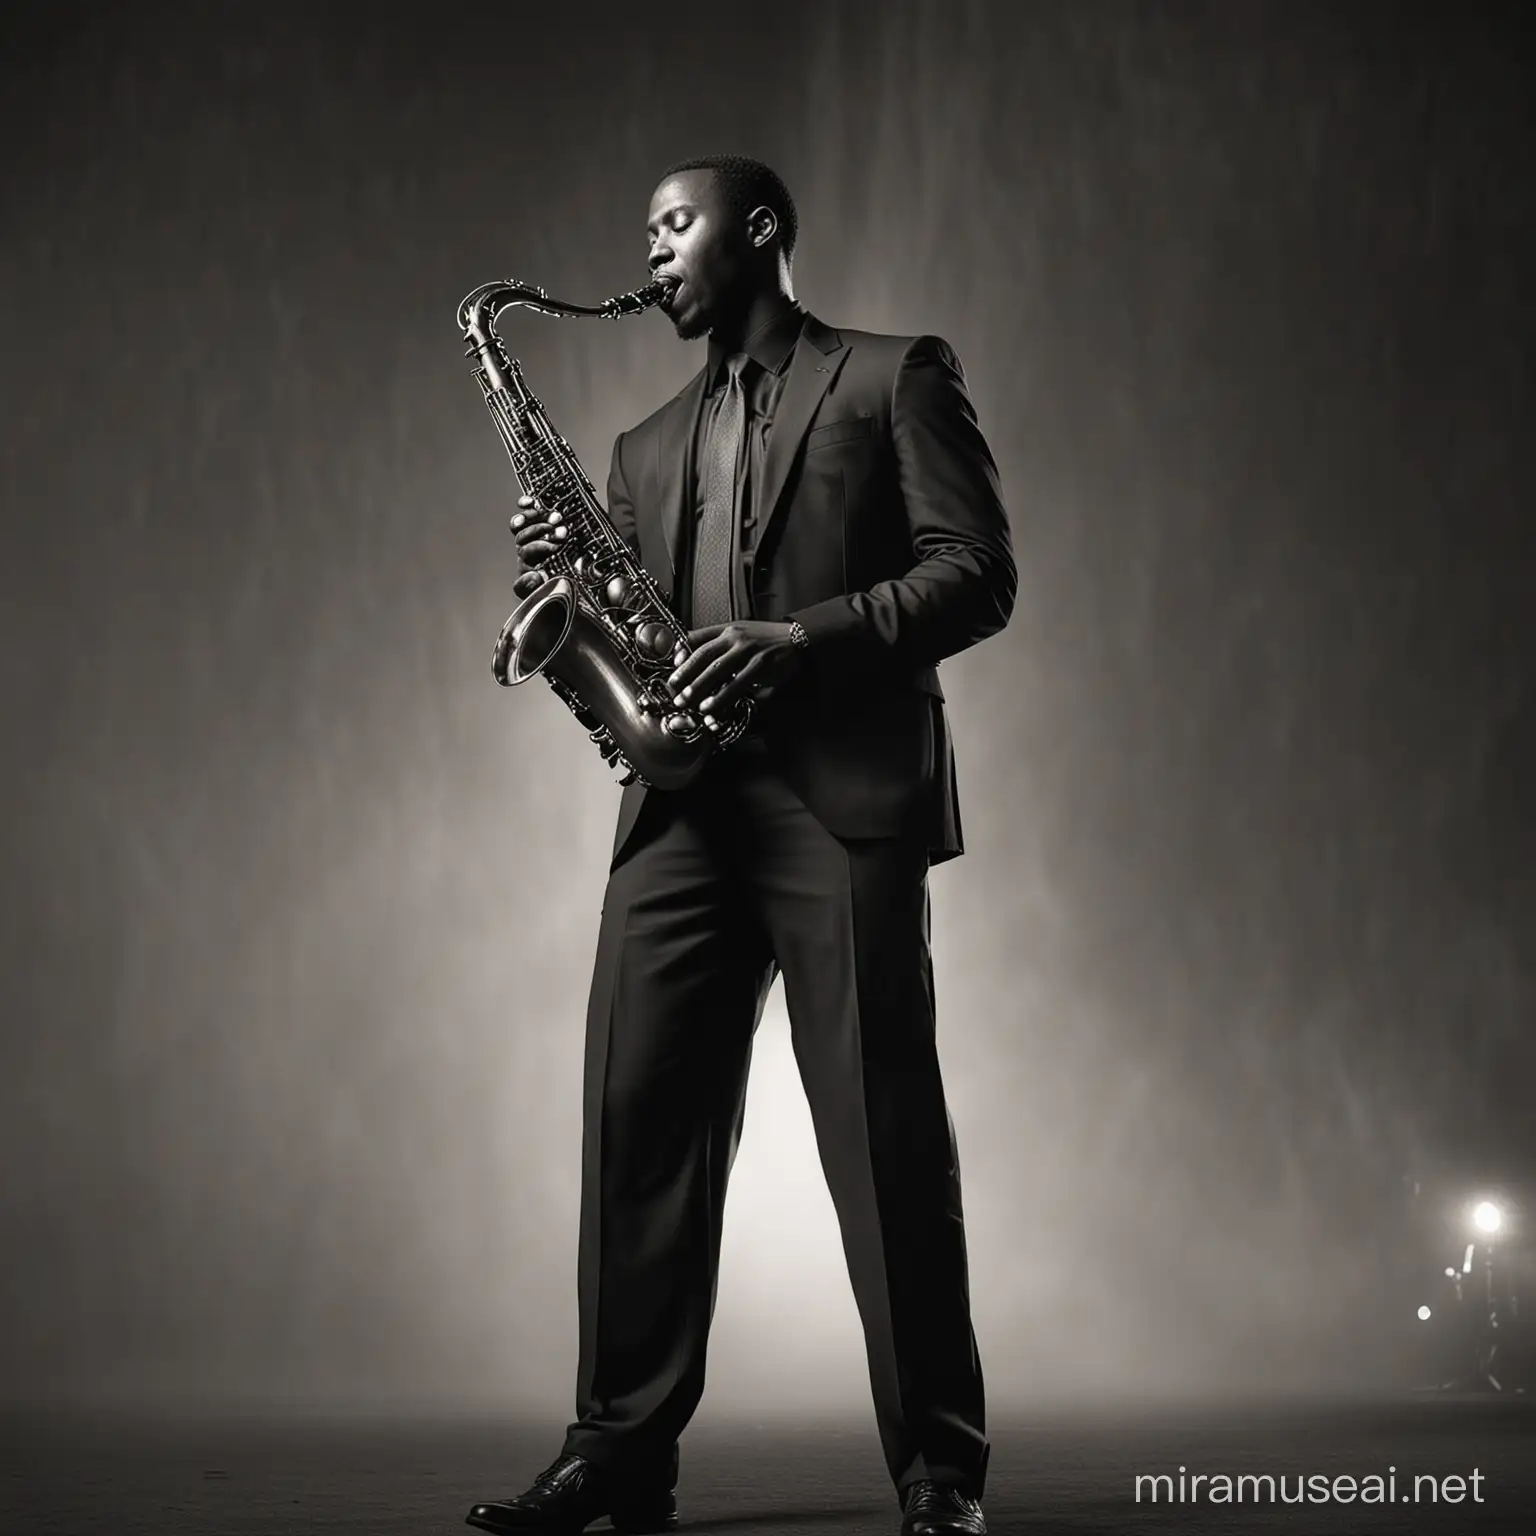 CREAT A DIGITAL PHOTO OF A black African man standING tall at 5 feet 10 inches, skillfully playing a real tenor saxophone in an awe-inspiring worship setting, WITH WORSHIPPERS SHOWING REFERENCE